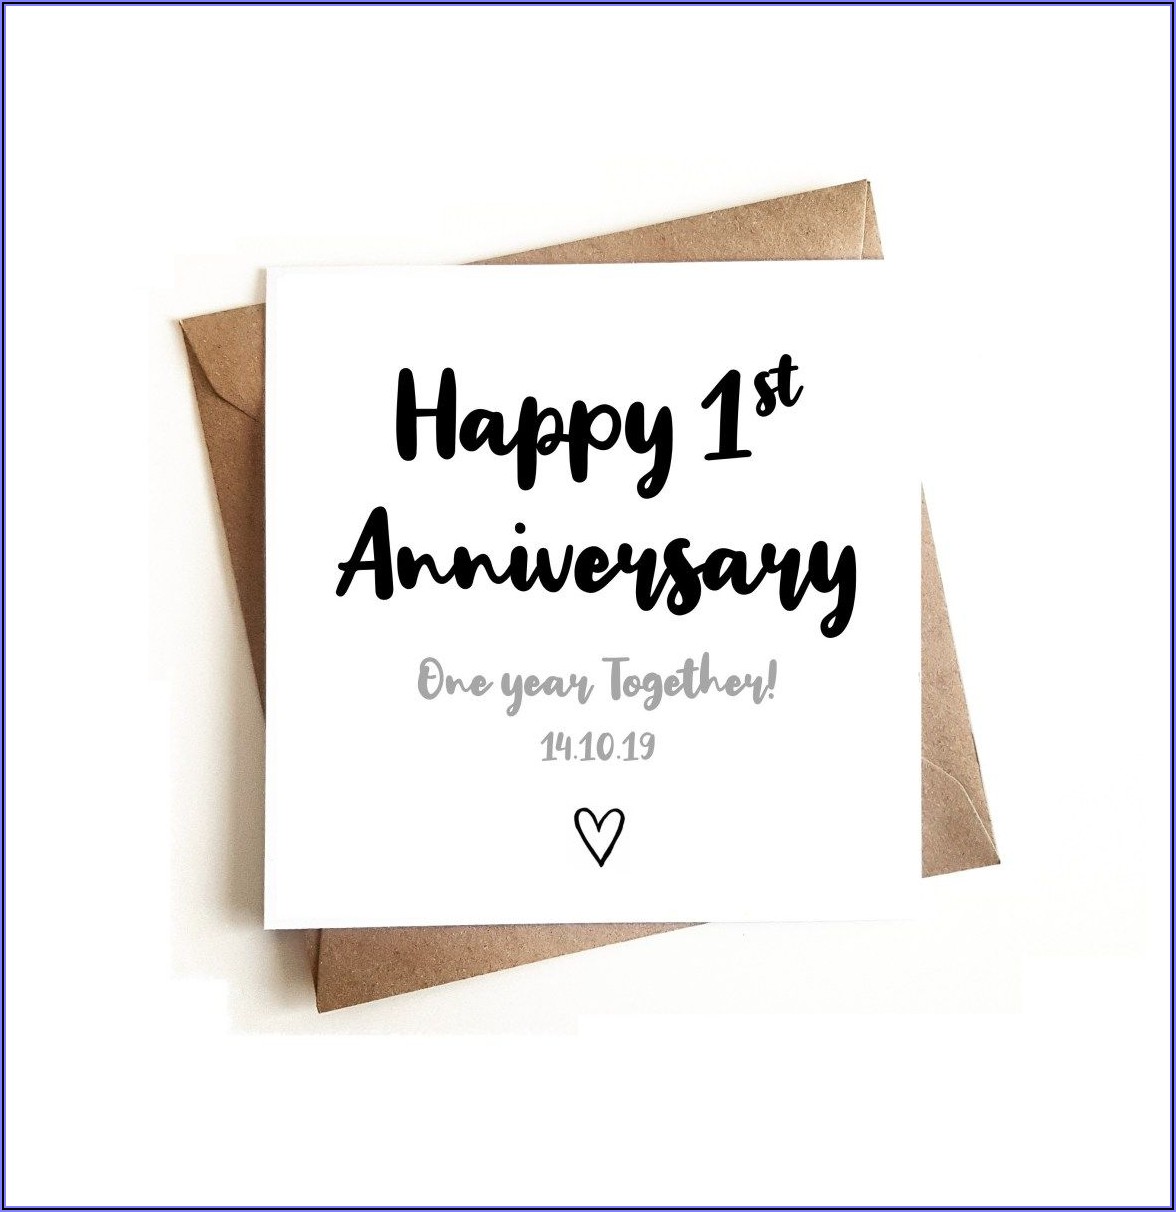 Happy 1st Anniversary Lettering